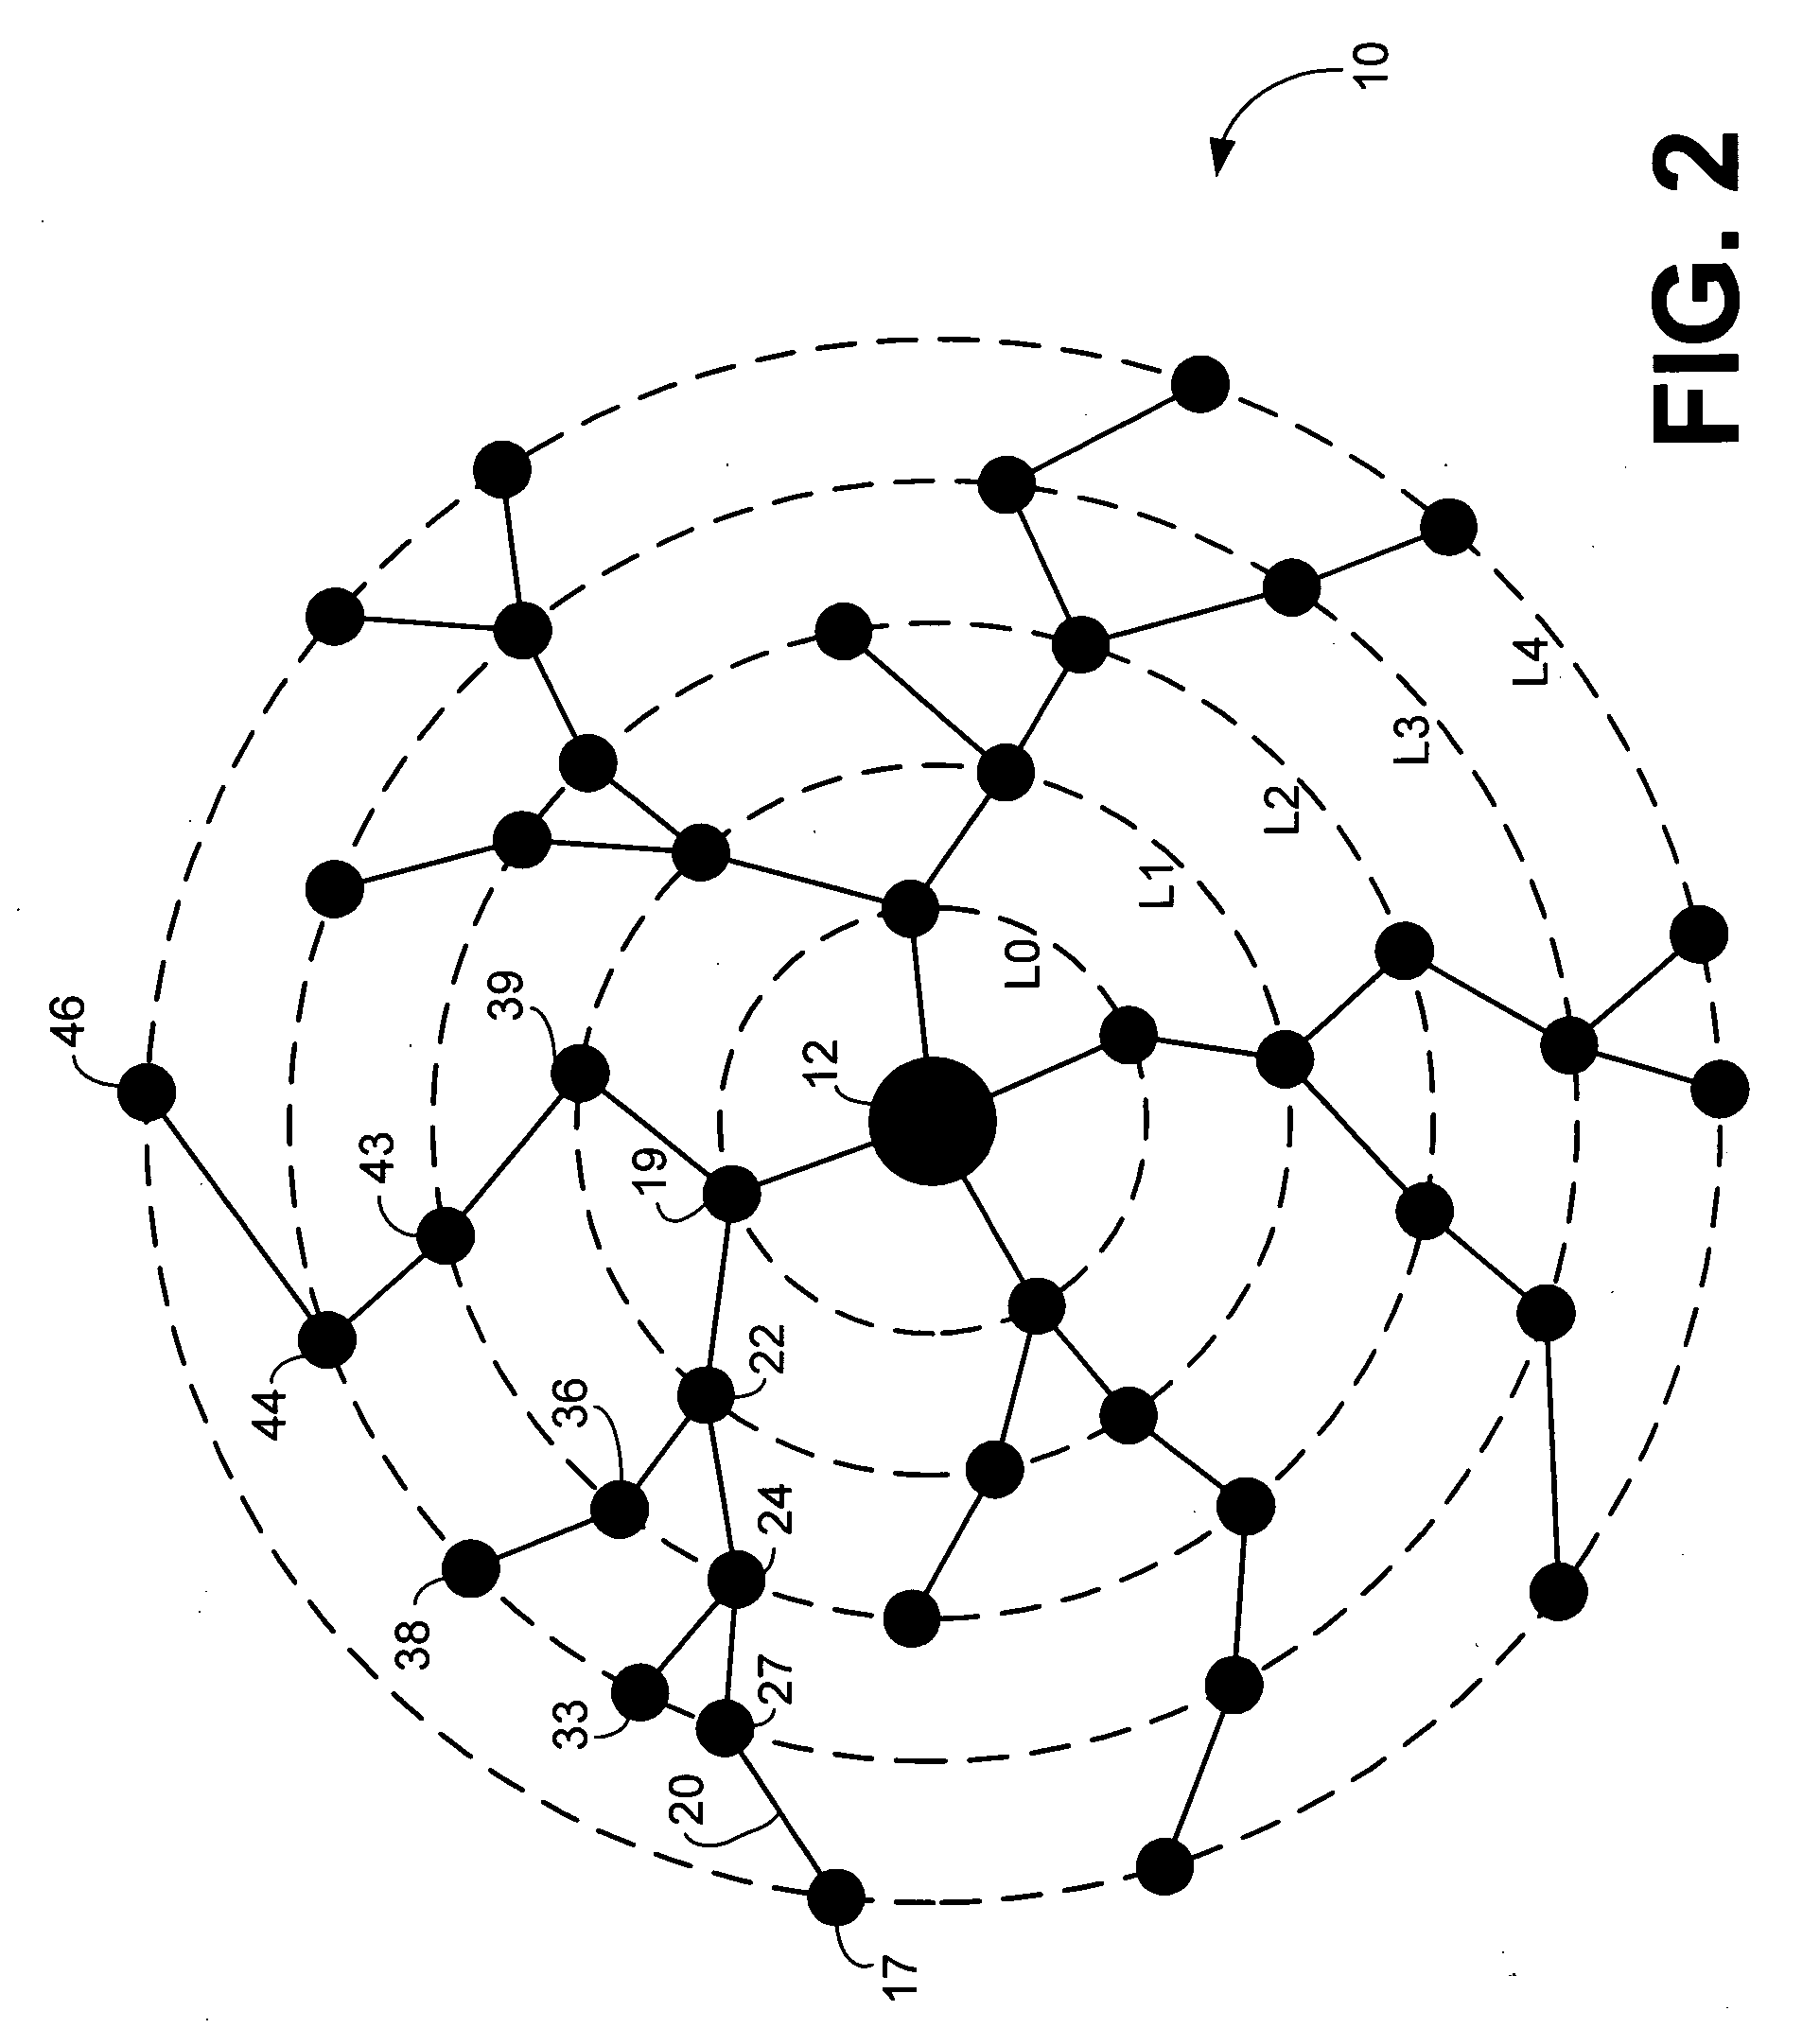 System and method for a wireless mesh network of configurable signage